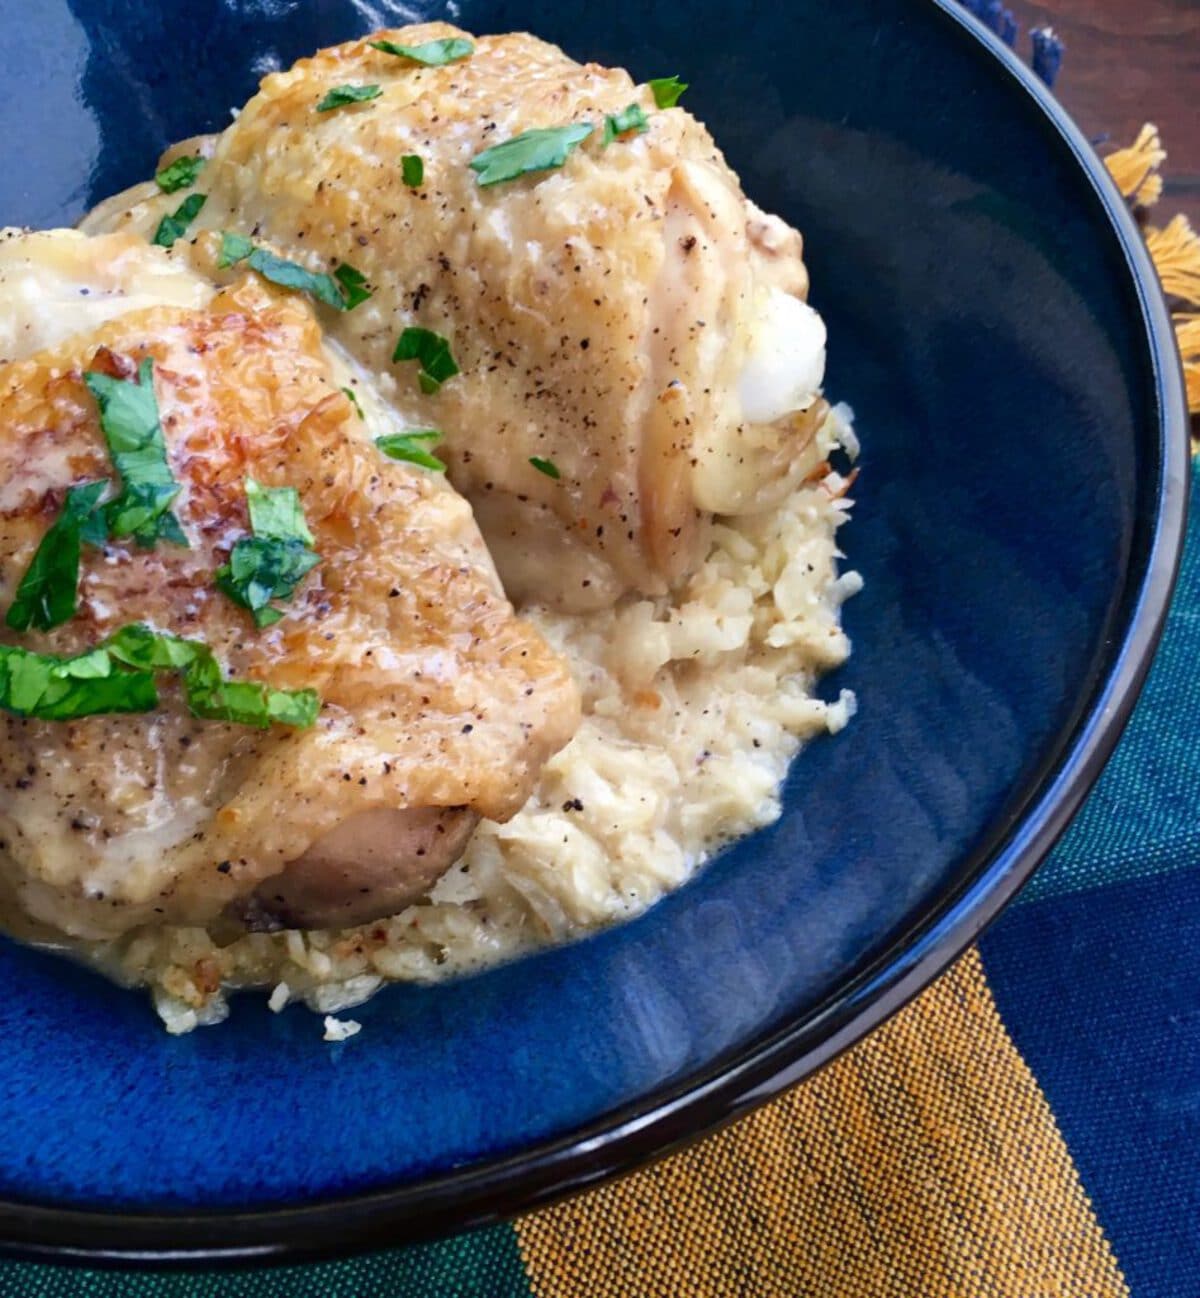 Chicken on bed of rice on blue plate